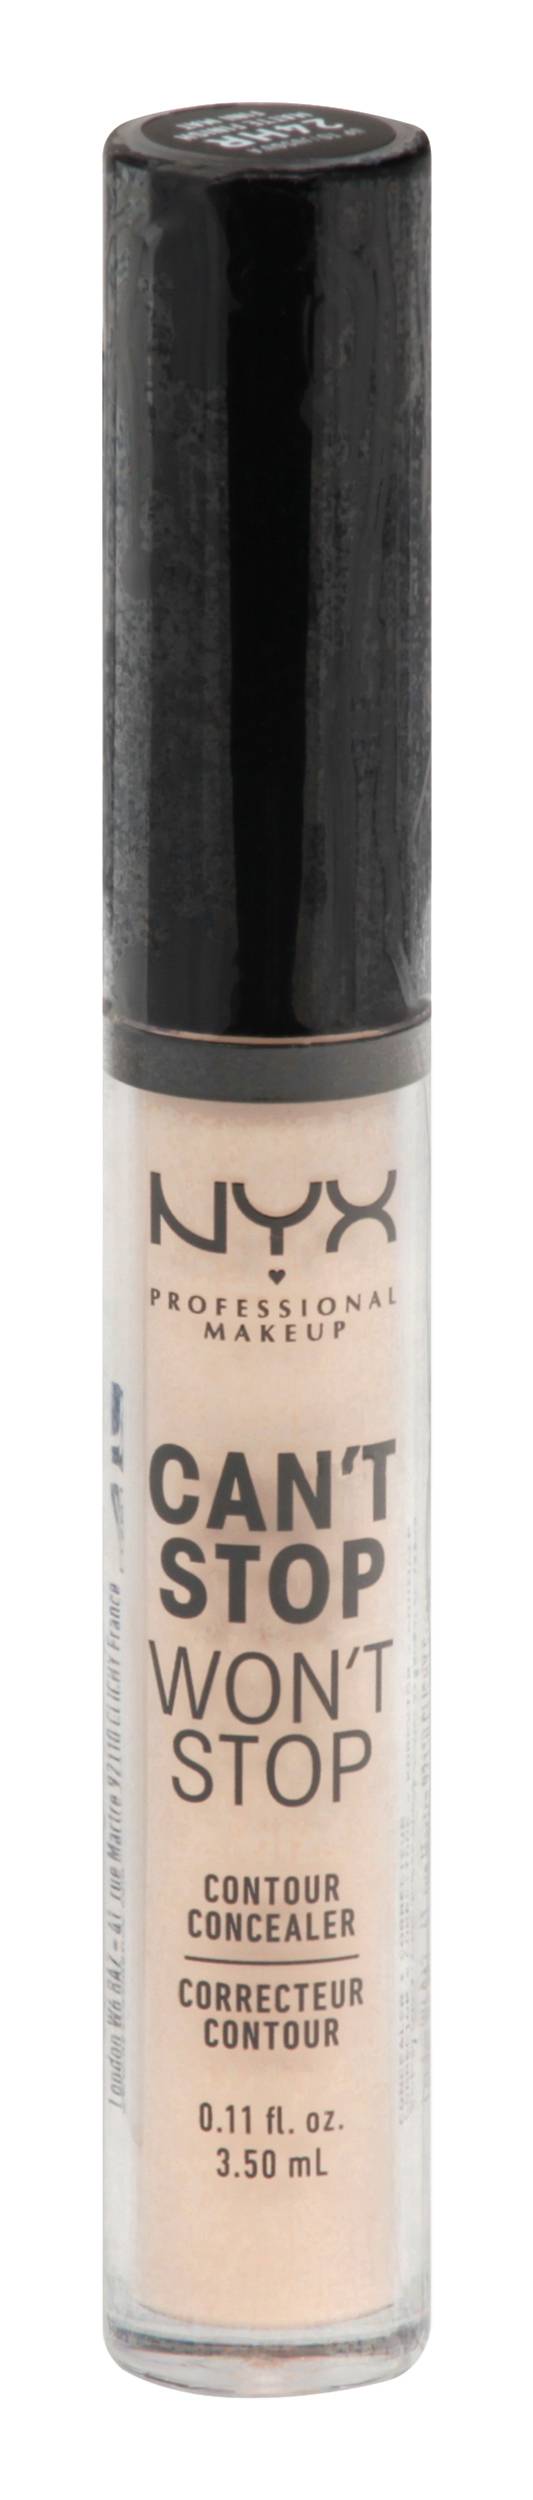 Nyx Can't Stop Won't Stop Vanilla Cswsc06 Contour Concealer | Delivery Near  You | Postmates